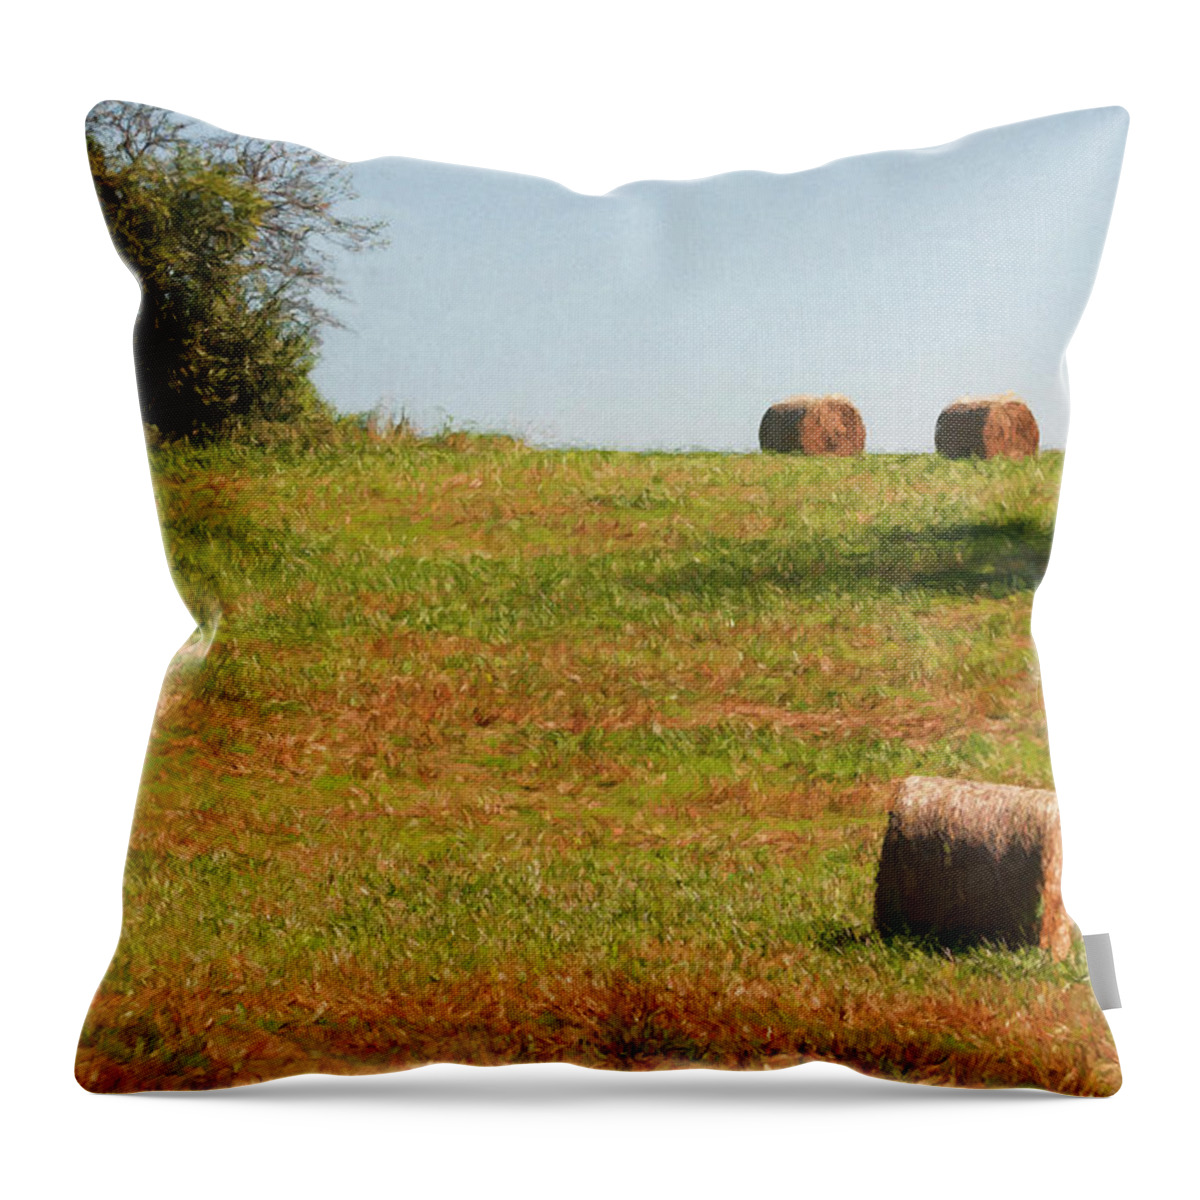 Hay Bales; Hay; Country; Lakemont; Georgia; Digital Art; Farm Throw Pillow featuring the photograph Hay Bales by Mick Burkey